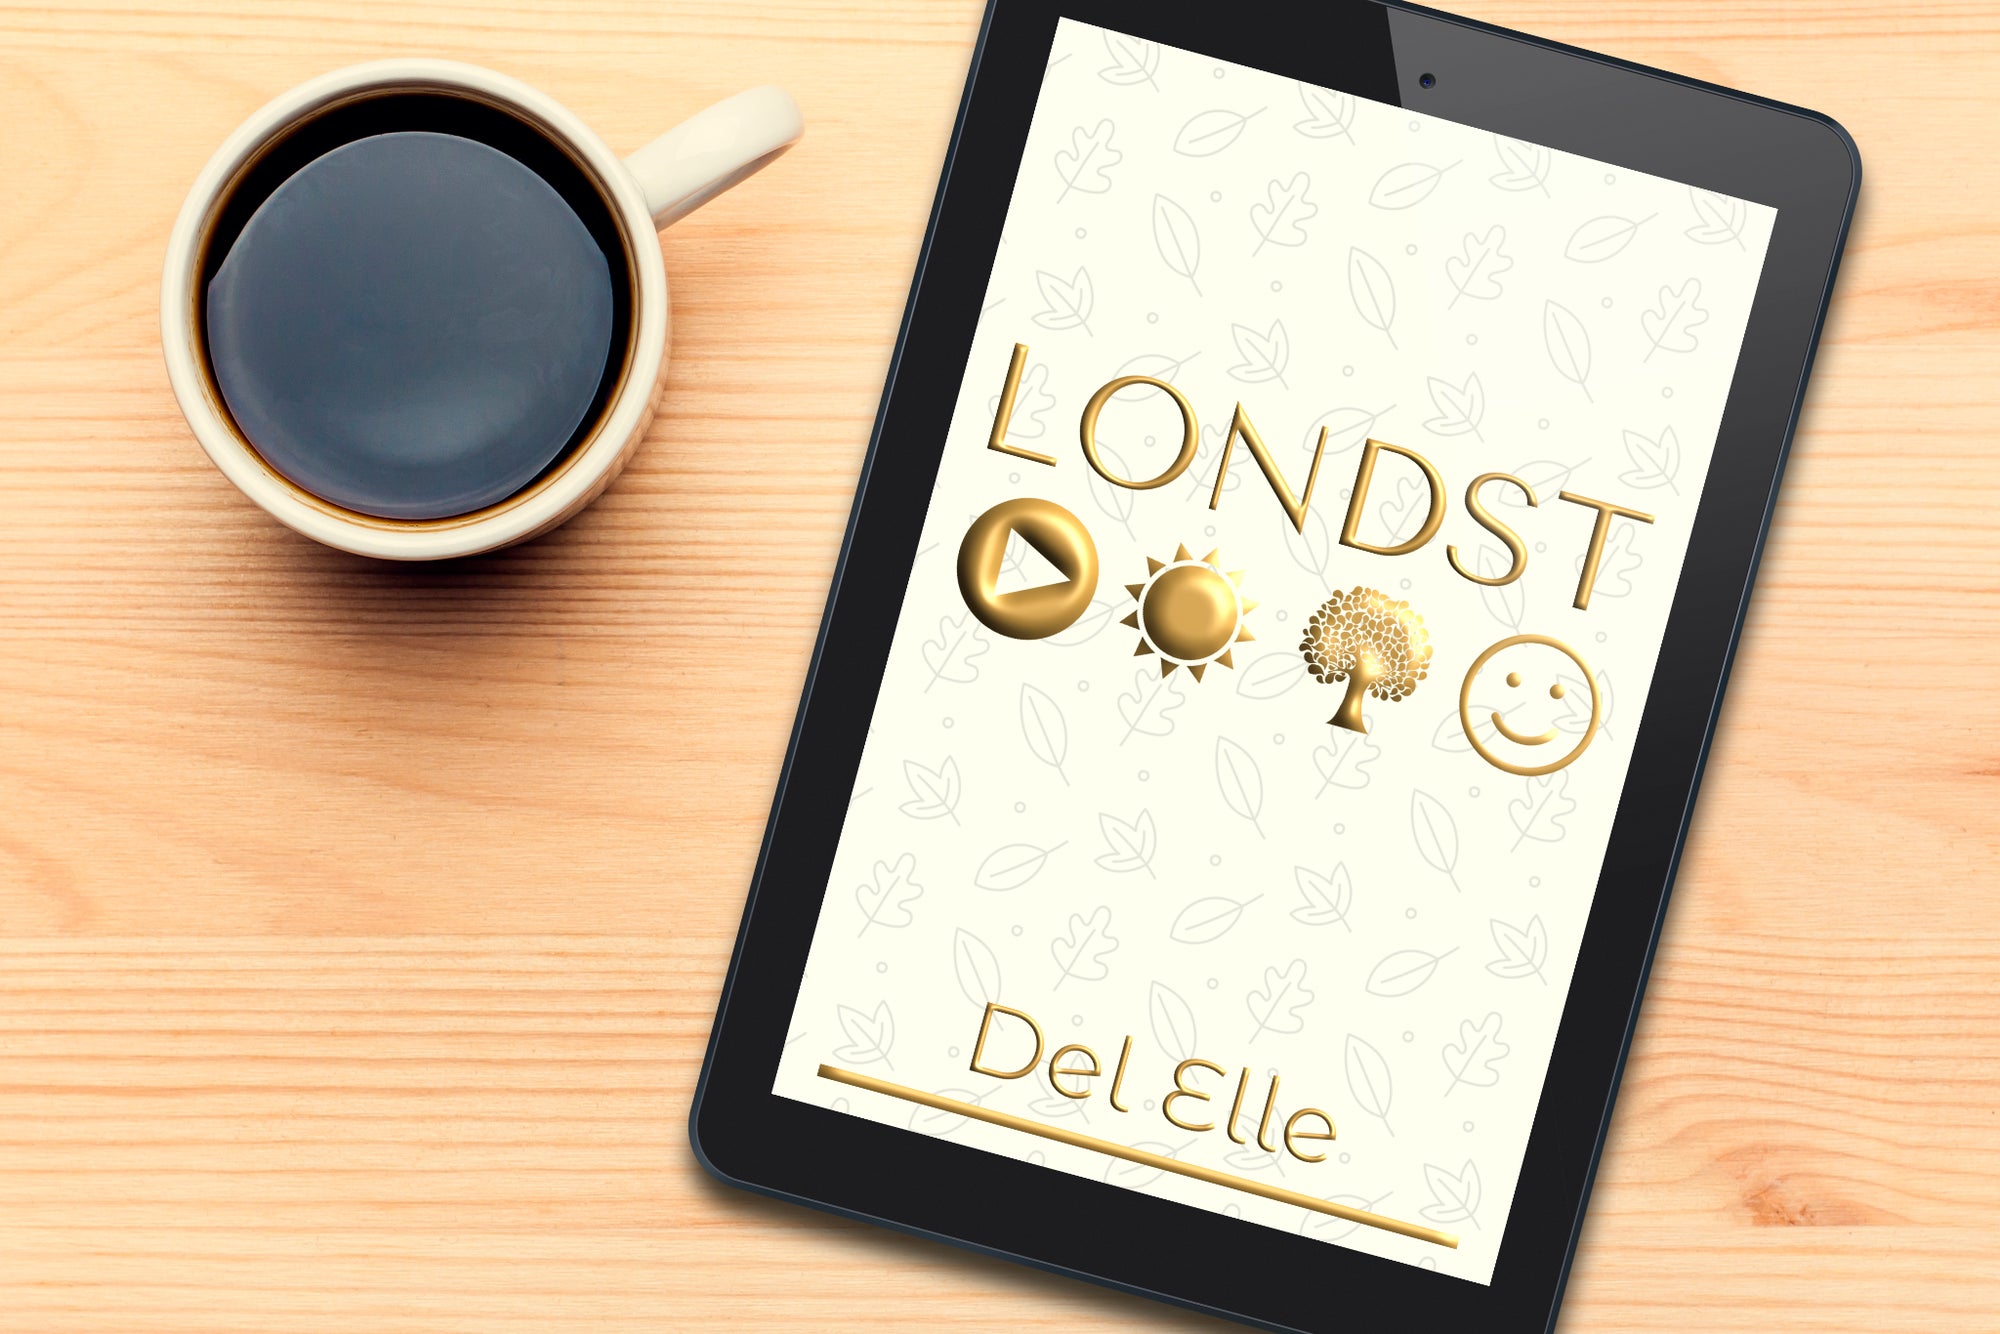 The short story Londst on an ebook reader